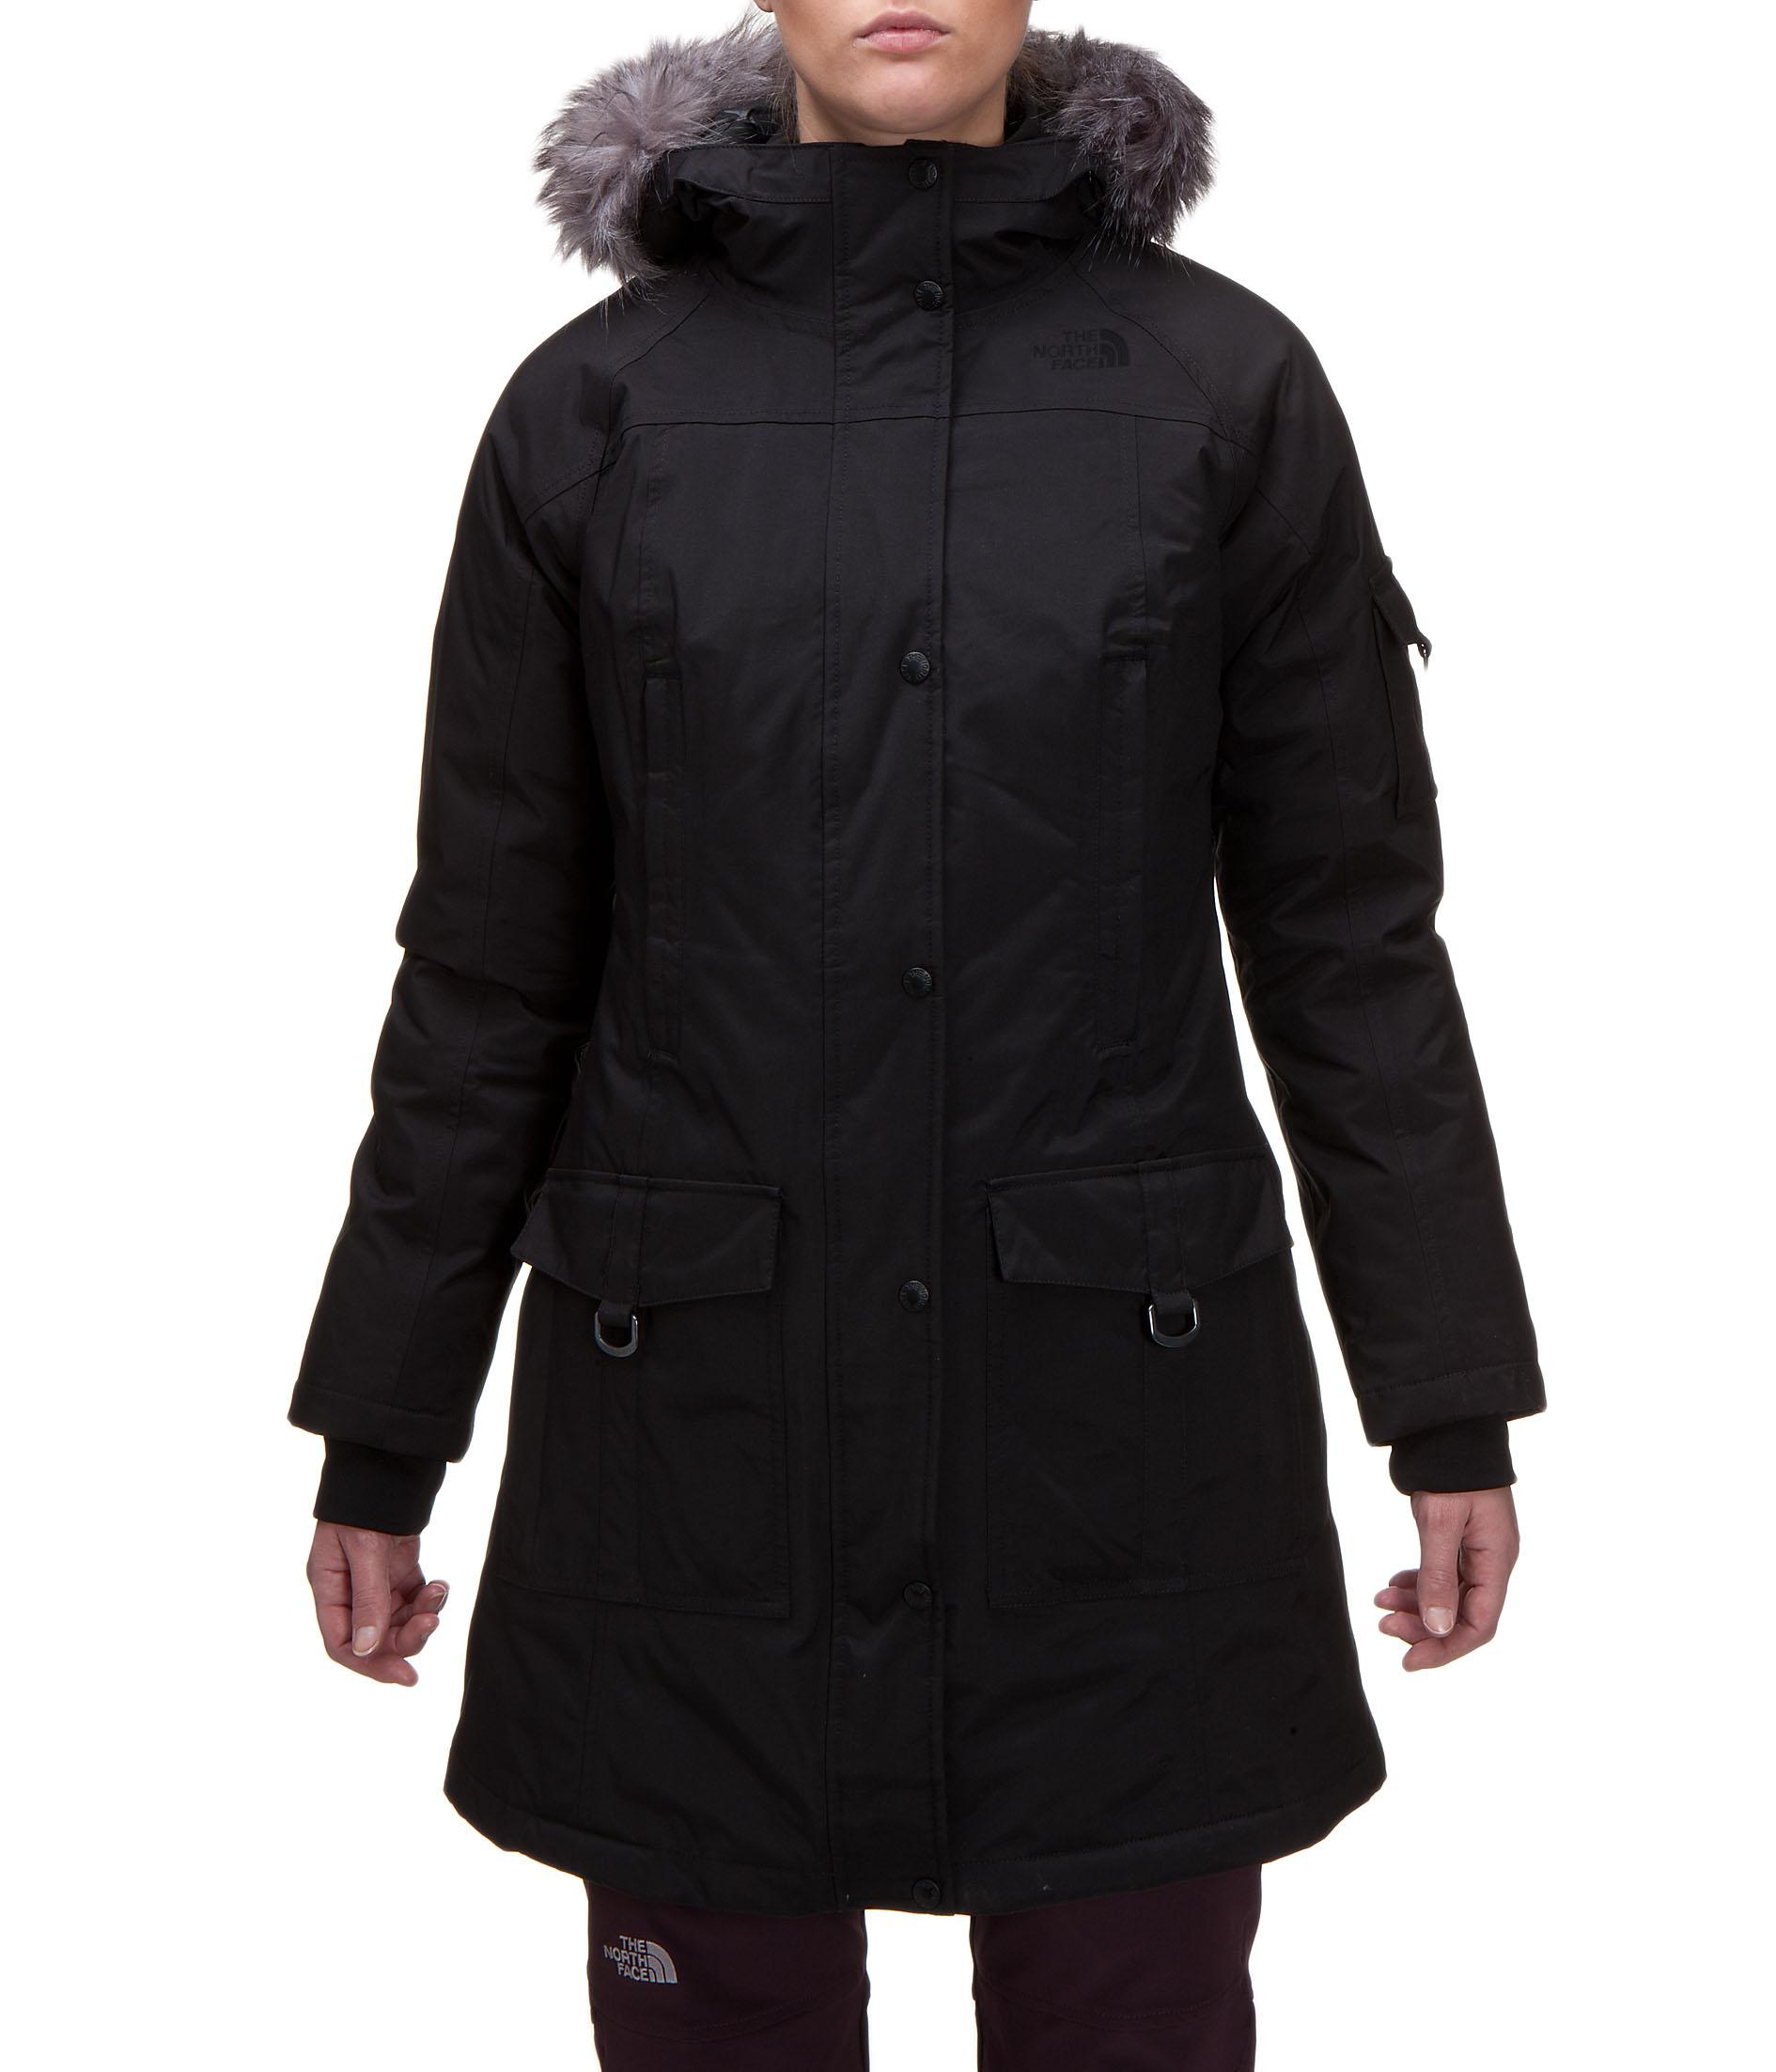 Foto The North Face Women's Insulated Juneau Jacket foto 76206